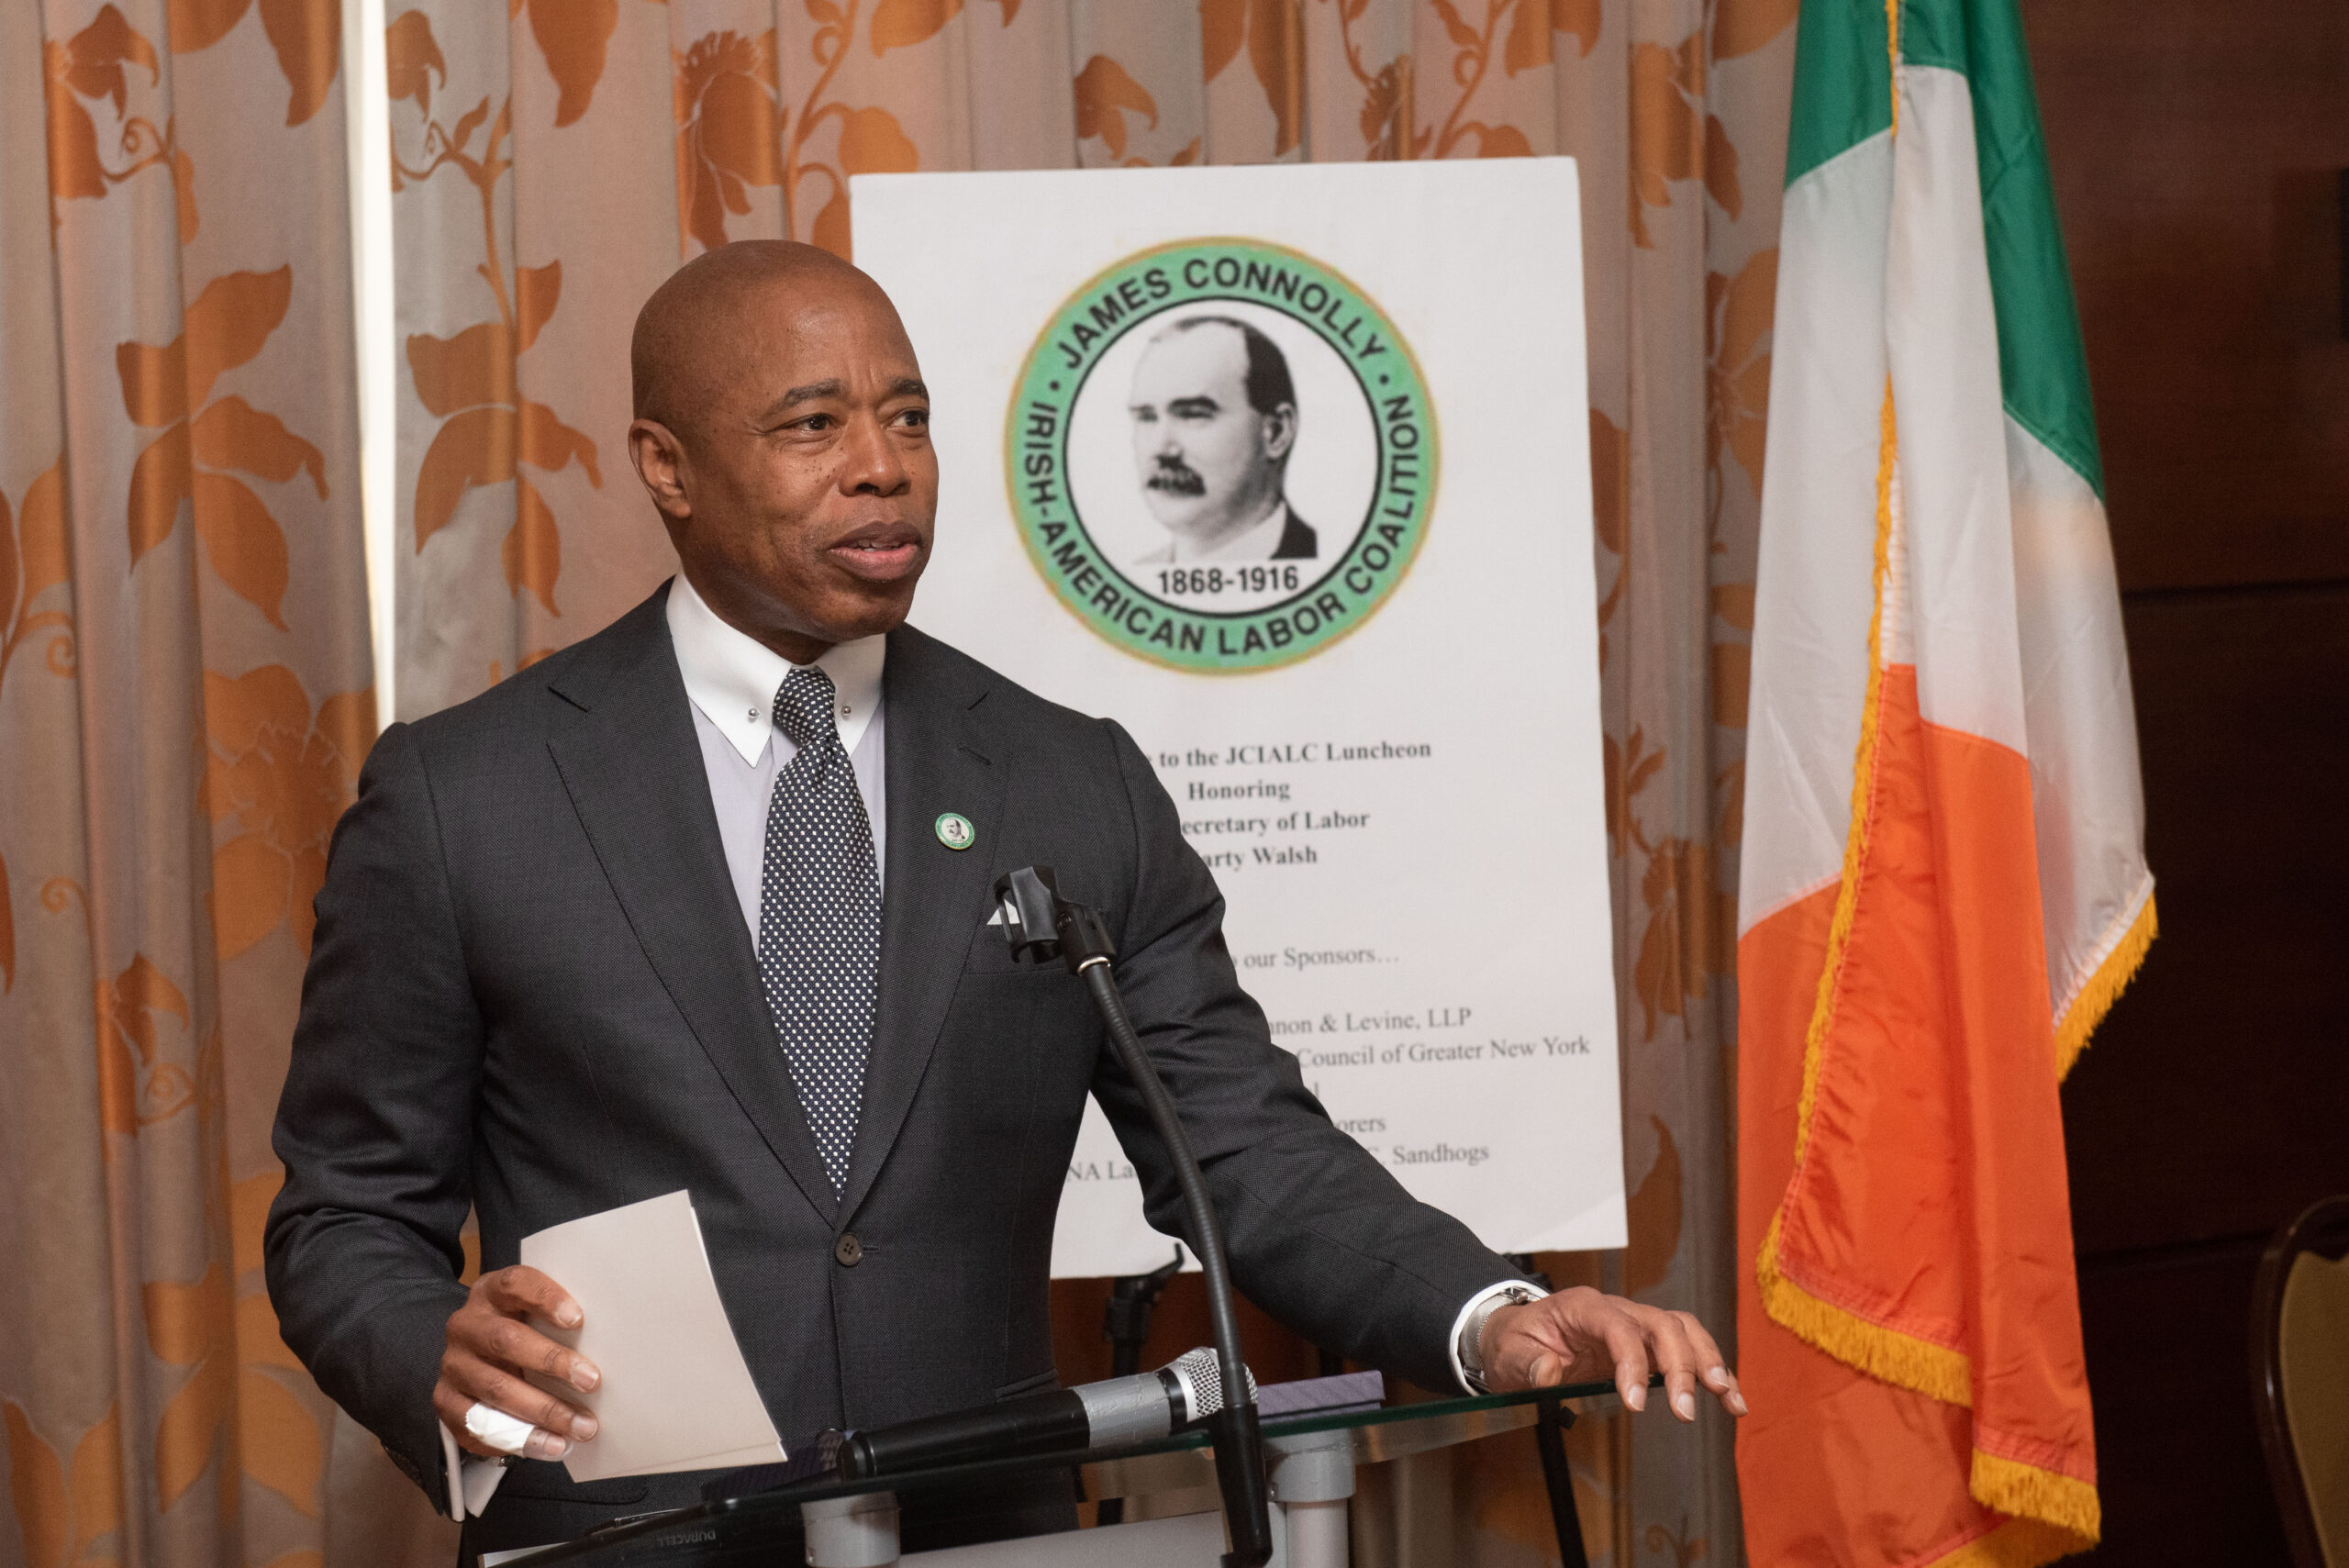 Mayor Eric Adams participates in the James Connolly Irish American Labor Coalition Luncheon in Midtown Manhattan on Wednesday, March 16, 2022. Michael Appleton/Mayoral Photography Office